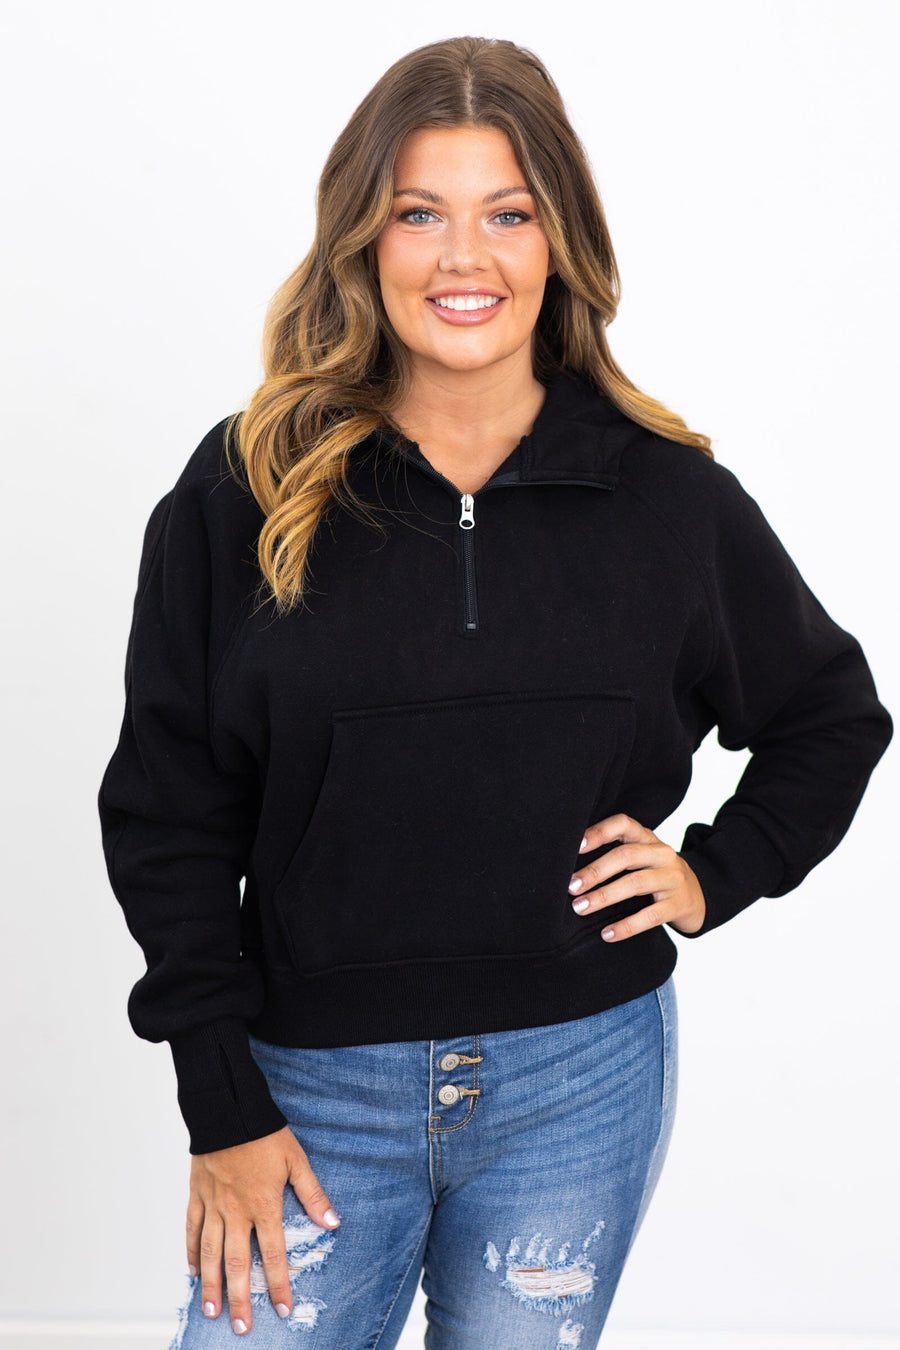 Sweatshirts & Hoodies for Women | Filly Flair · Filly Flair